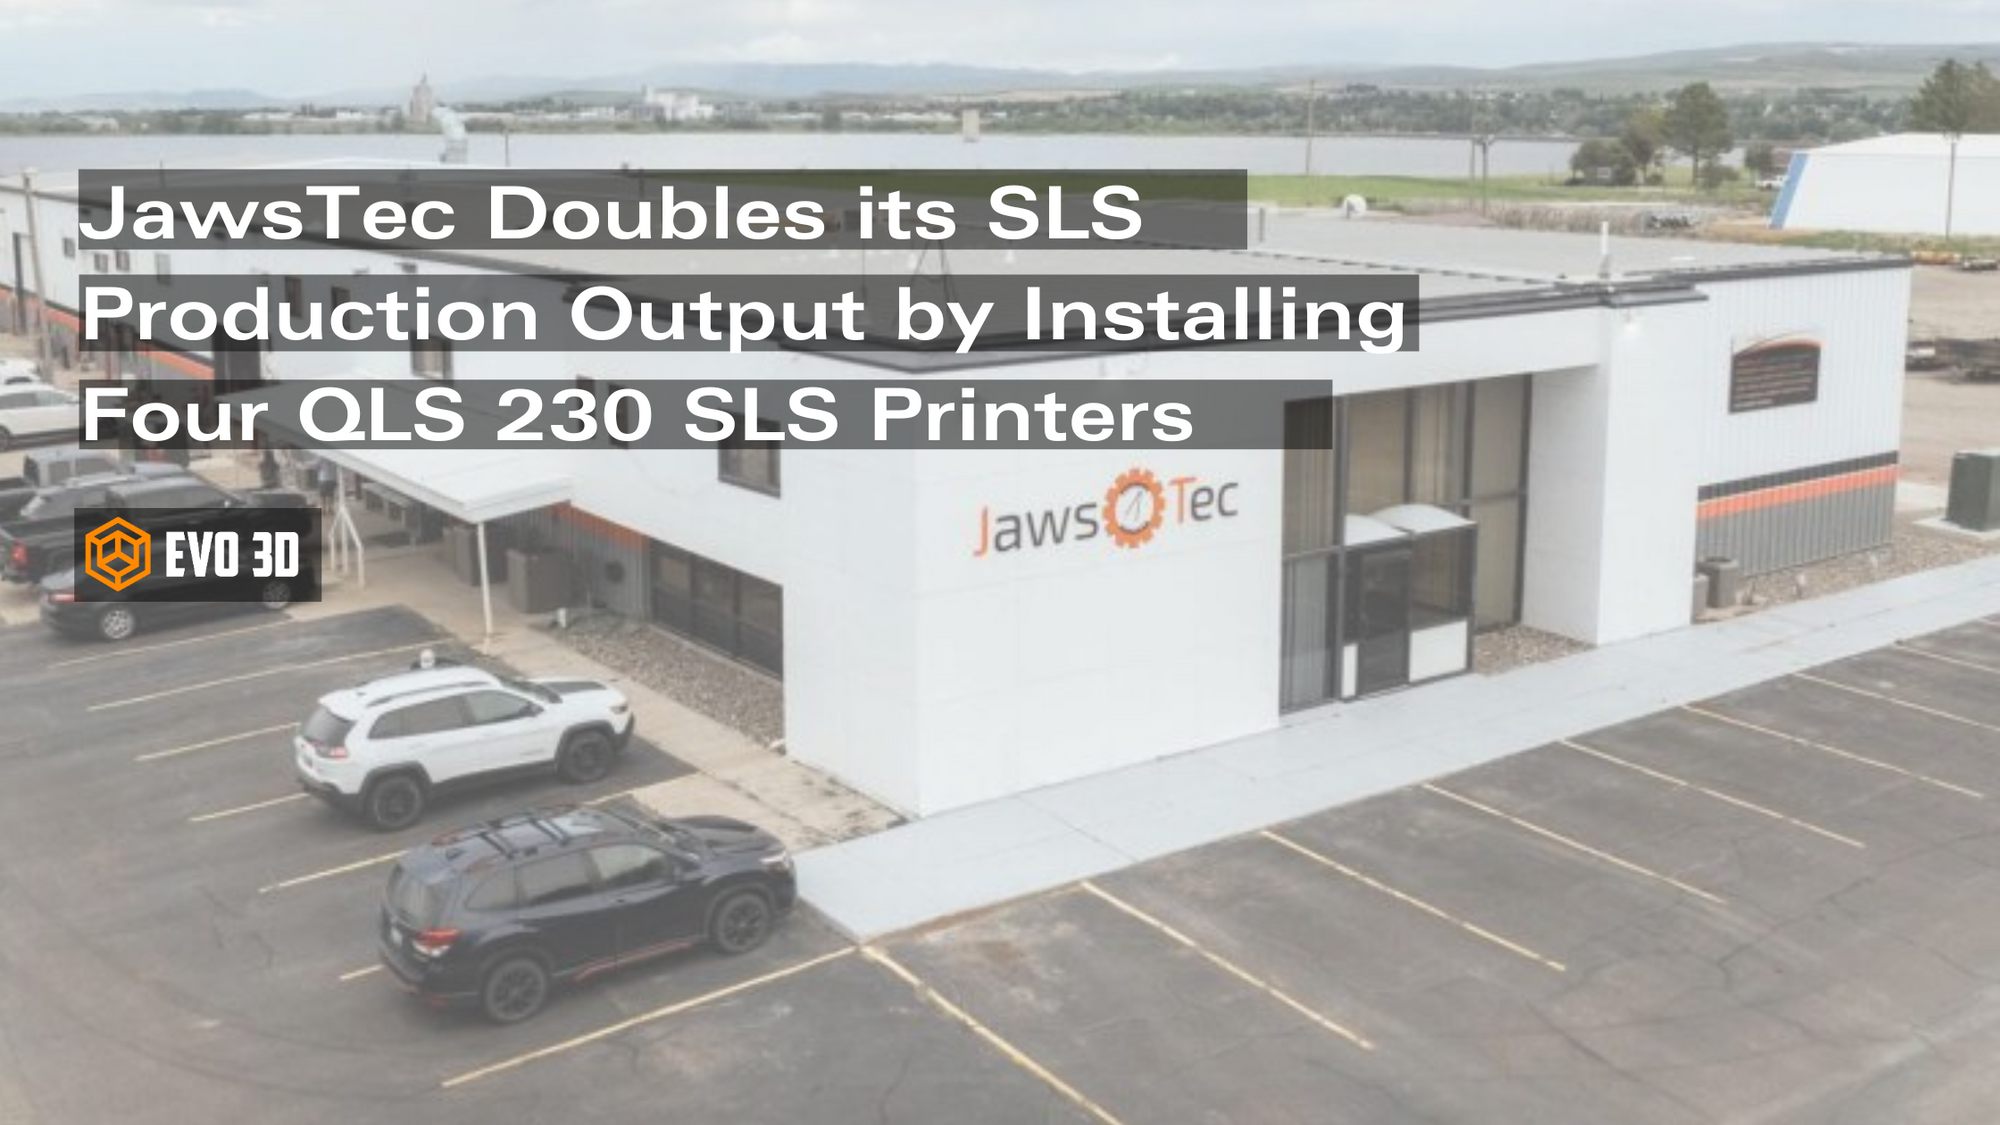 JawsTec Doubles its SLS Production Output by Installing Four QLS 230 SLS Printers